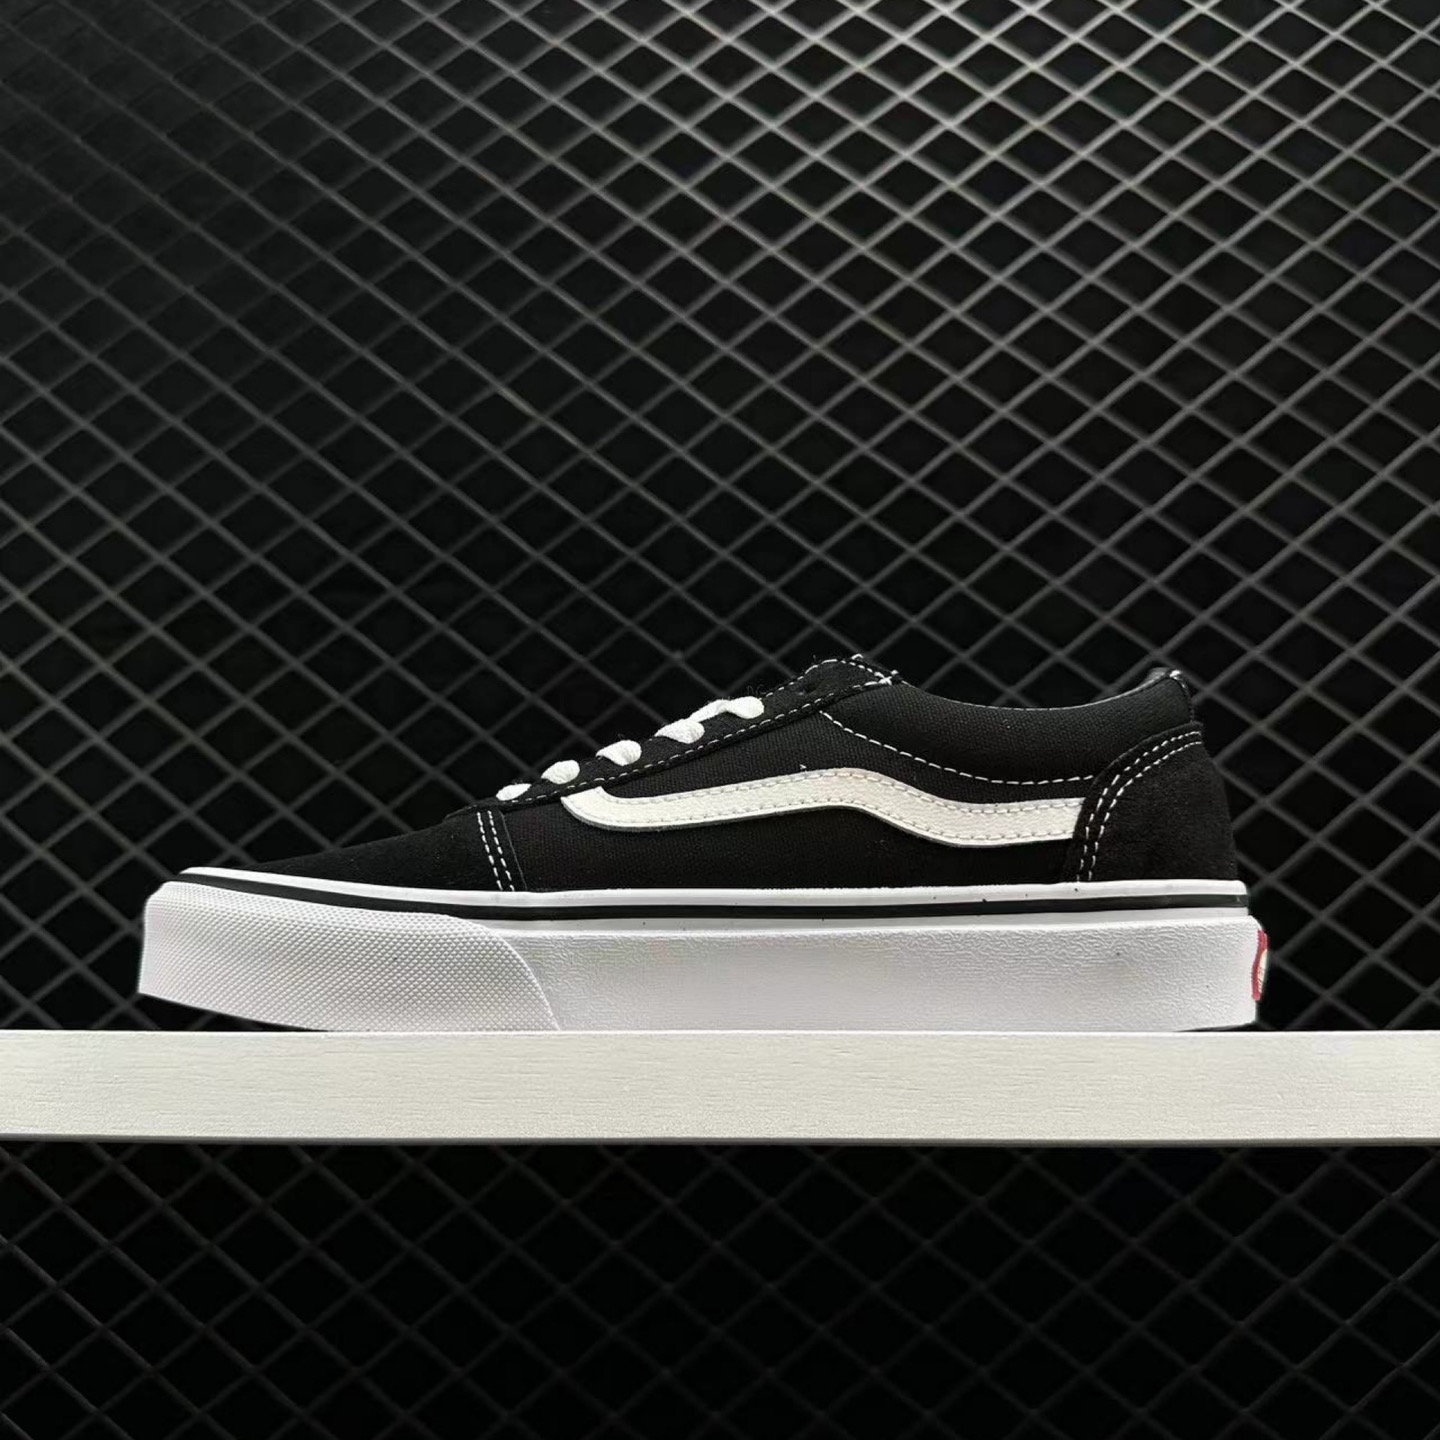 Vans Ward Black: Stylish and Versatile Sneakers for Every Occasion